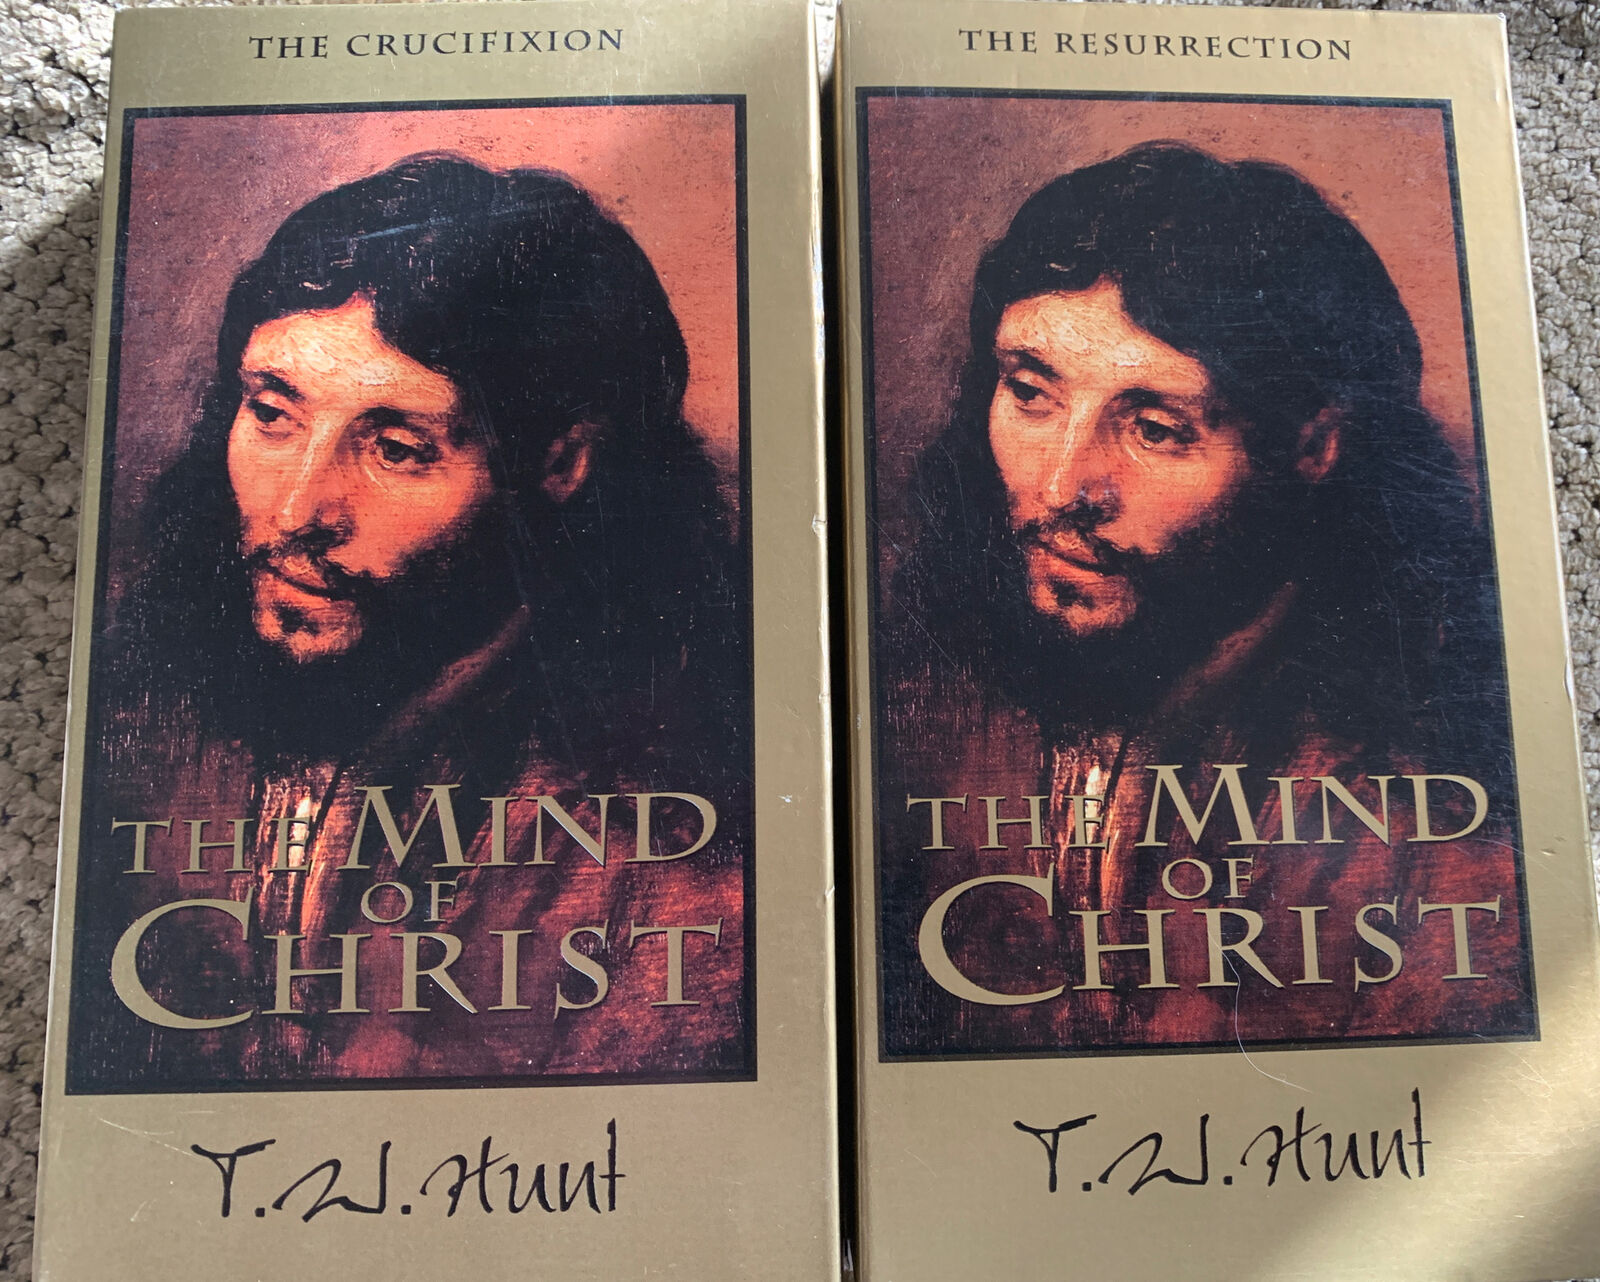 The Mind of Christ, The Conference Video Series, 1 And 2 VHS Series